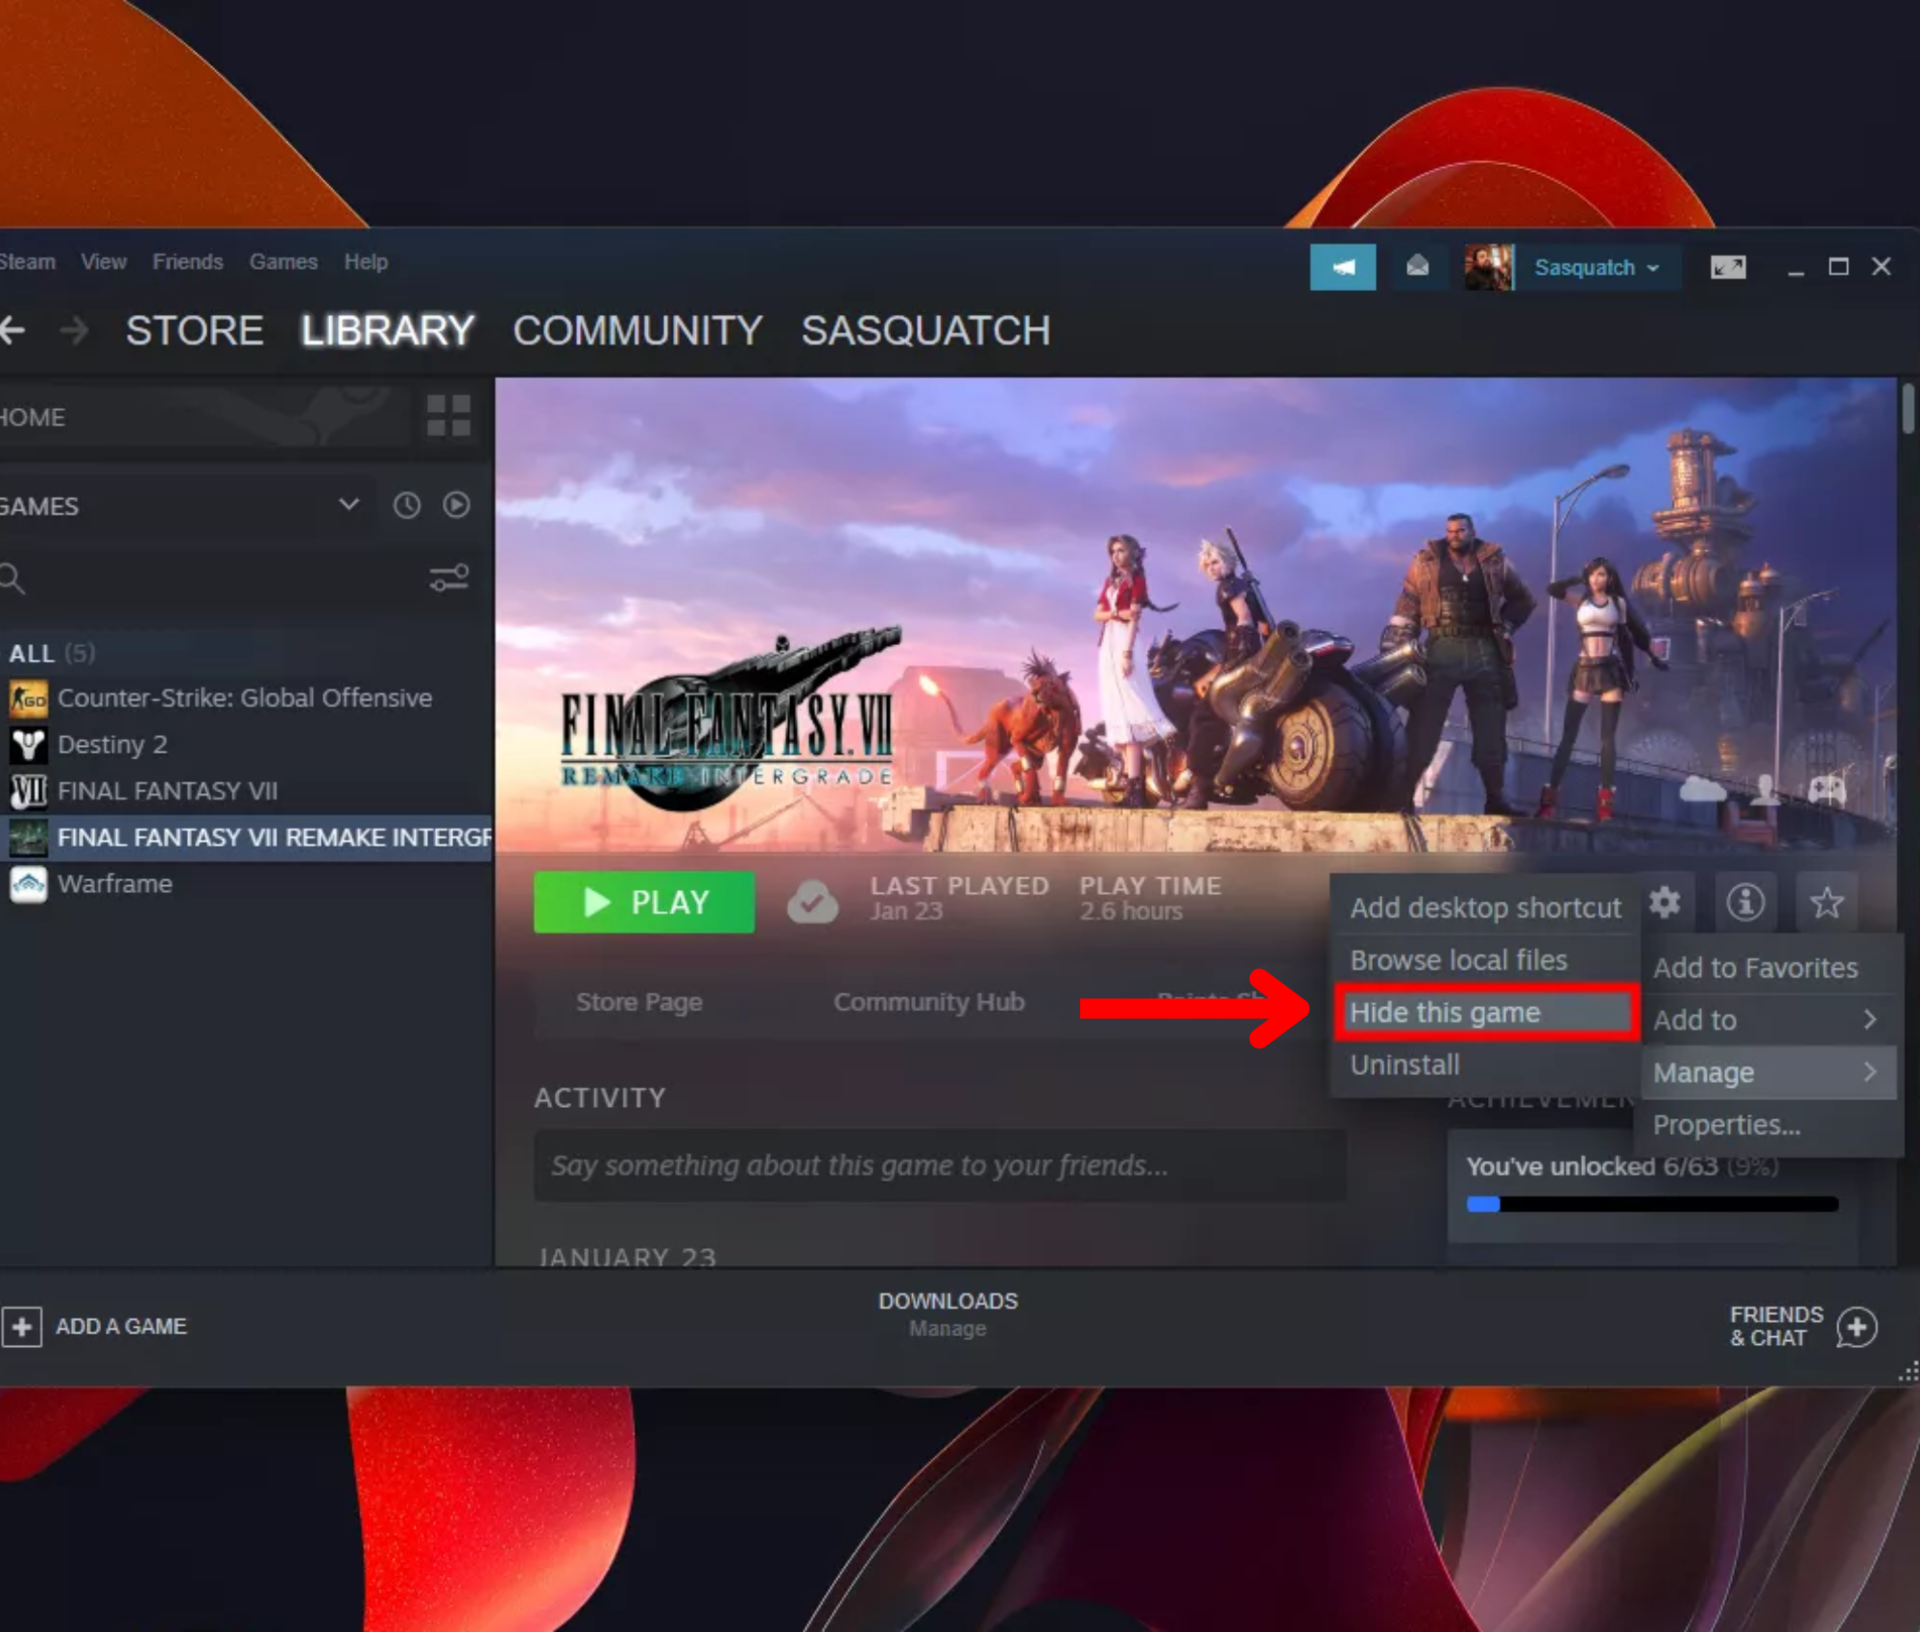 How to Unhide Games on Steam: 7 Easy Steps